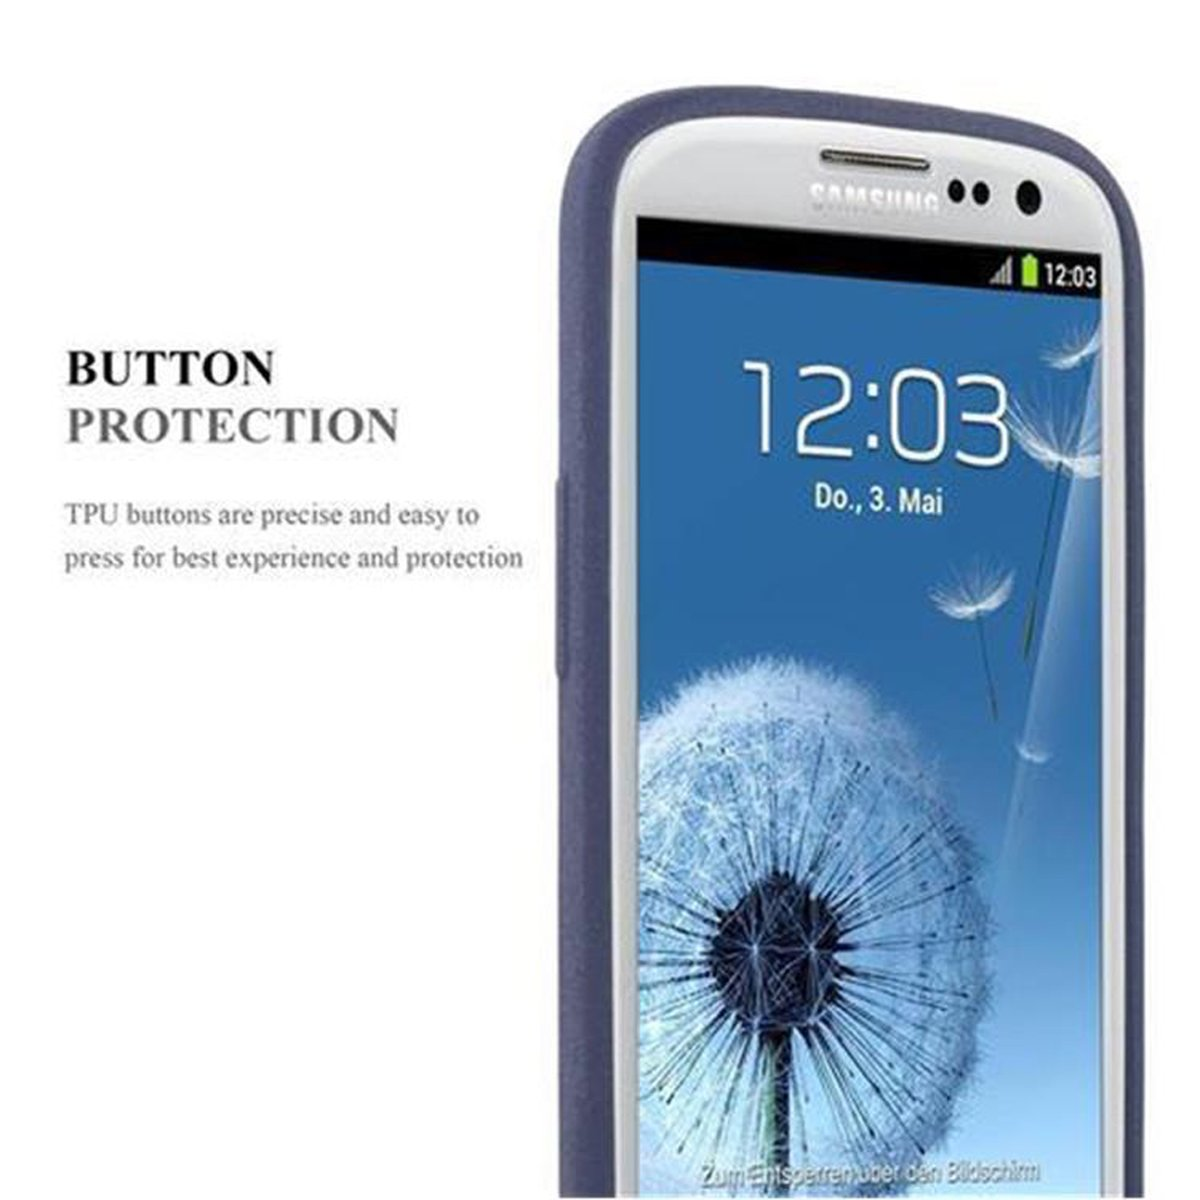 / Samsung, NEO, BLAU Galaxy S3 Frosted Schutzhülle, DUNKEL FROST Backcover, S3 TPU CADORABO